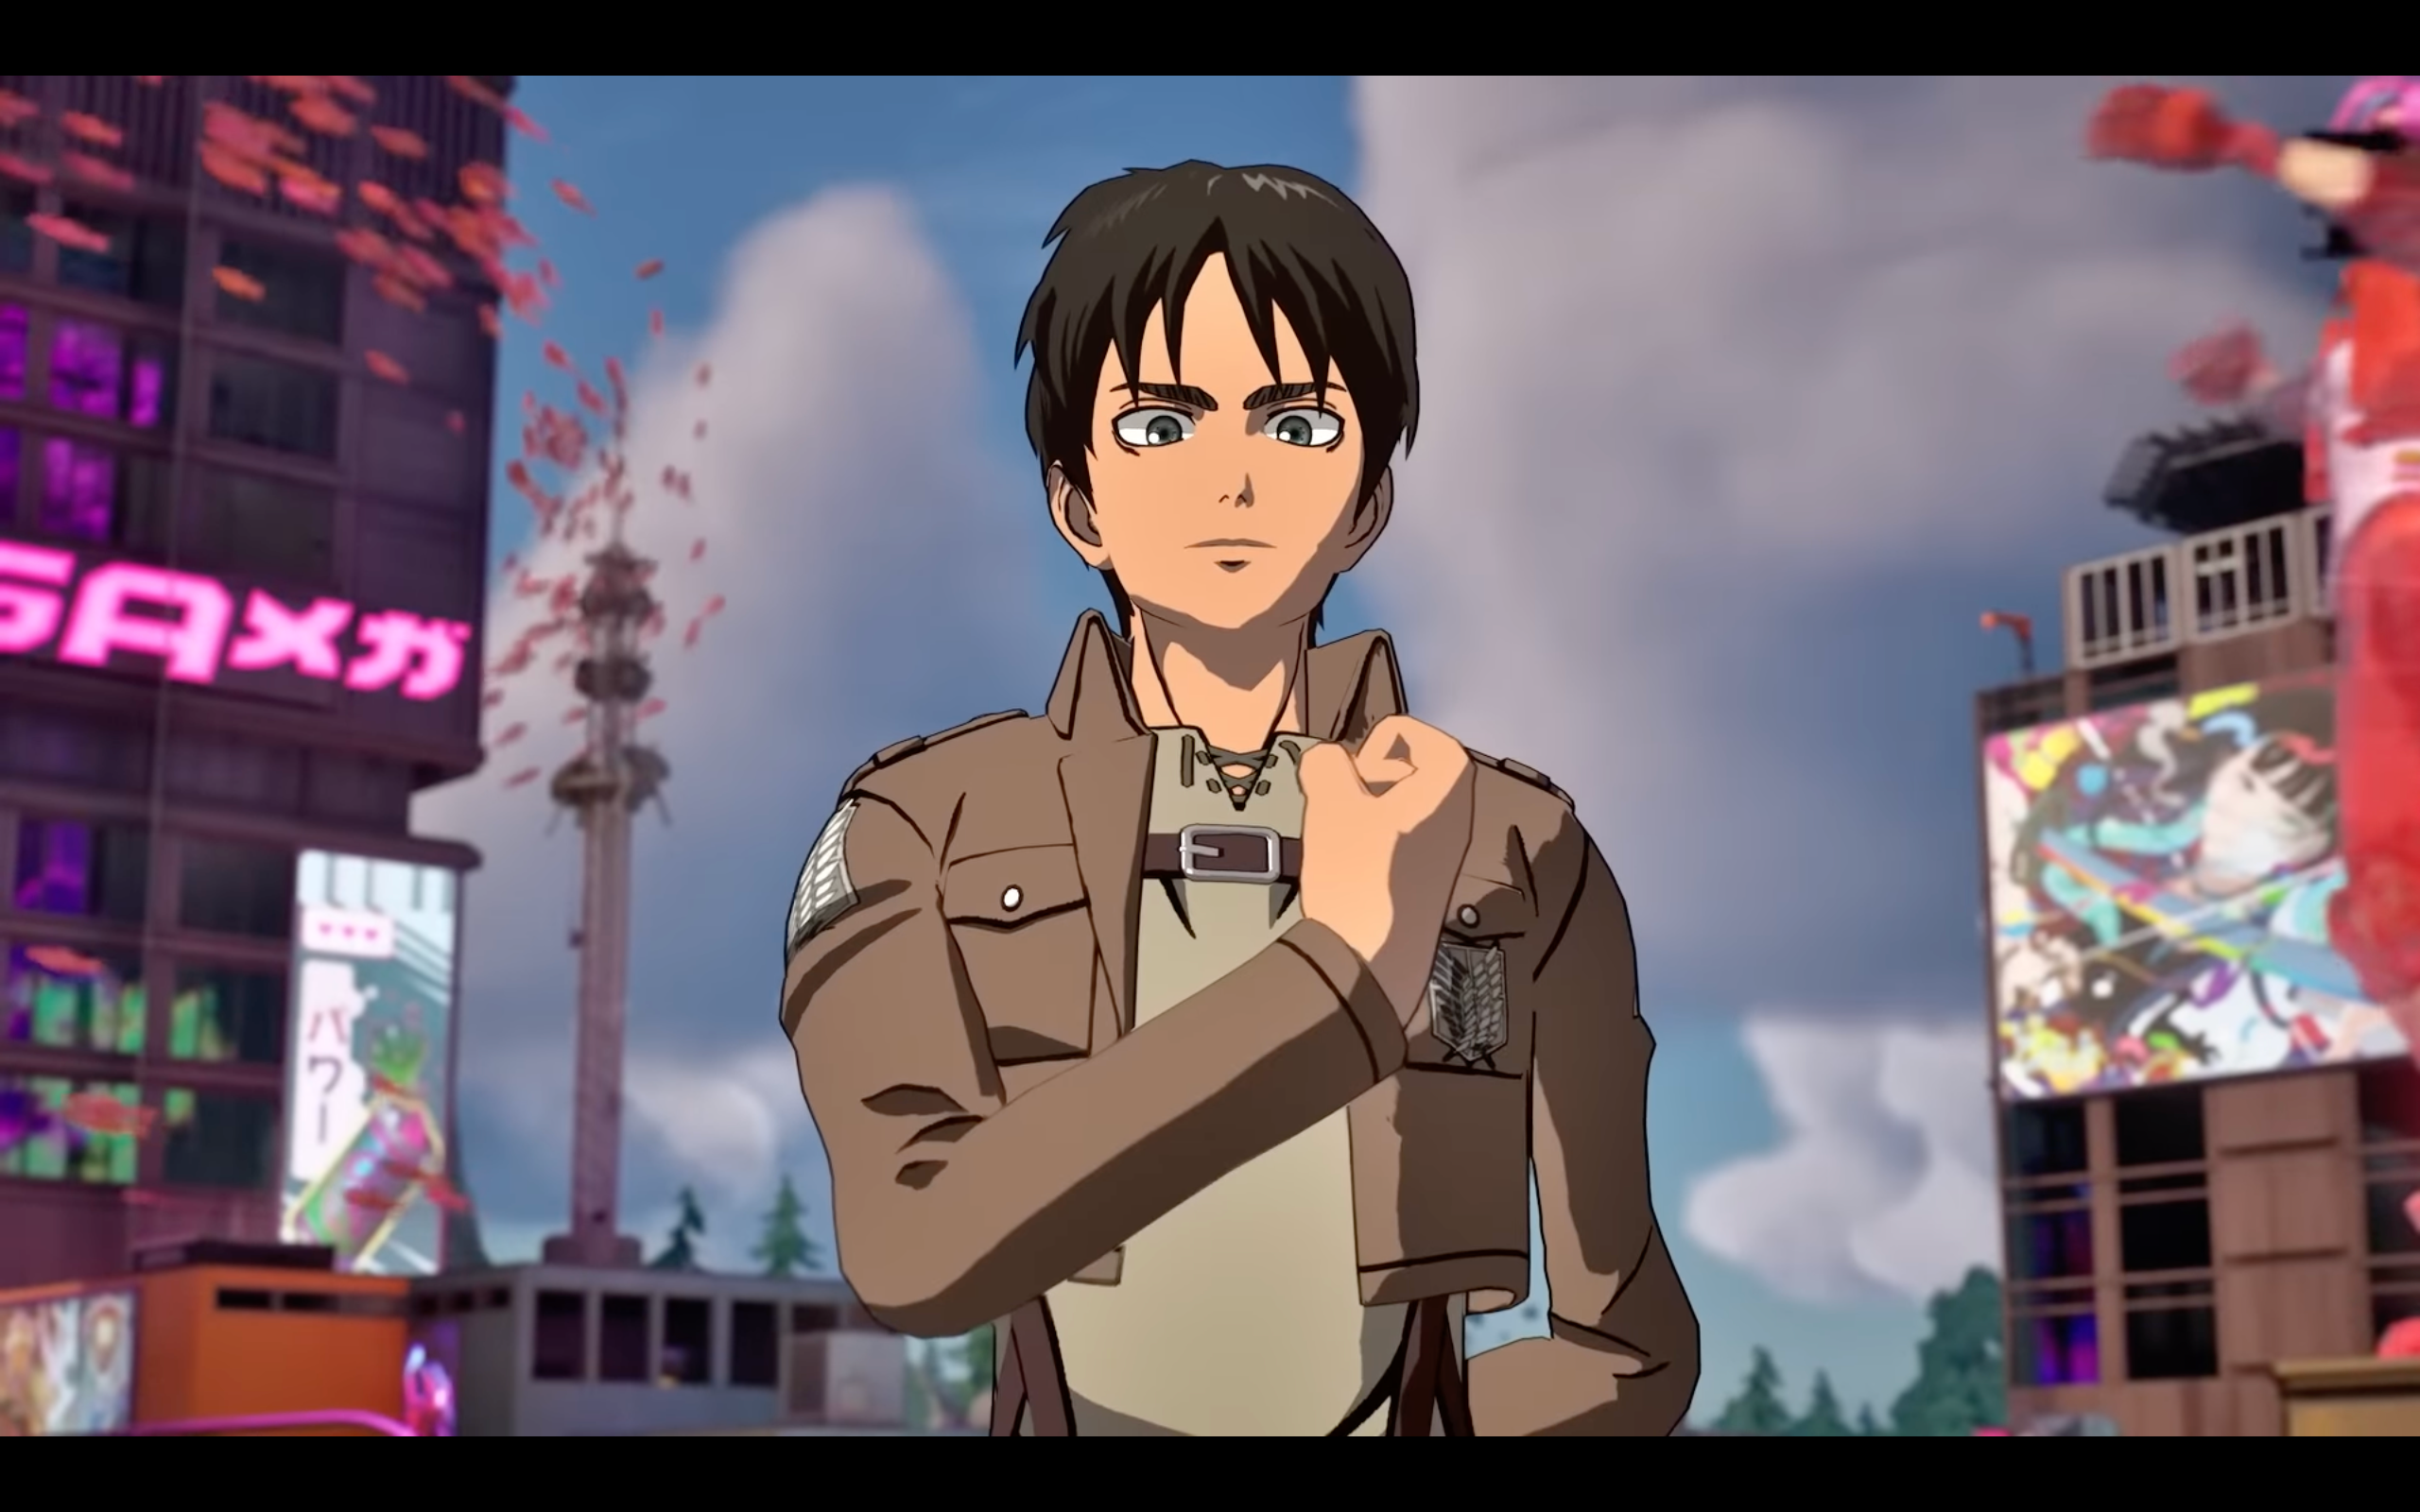 Fortnite Videos Show Attack on Titan’s Eren Yeager in Action - Siliconera